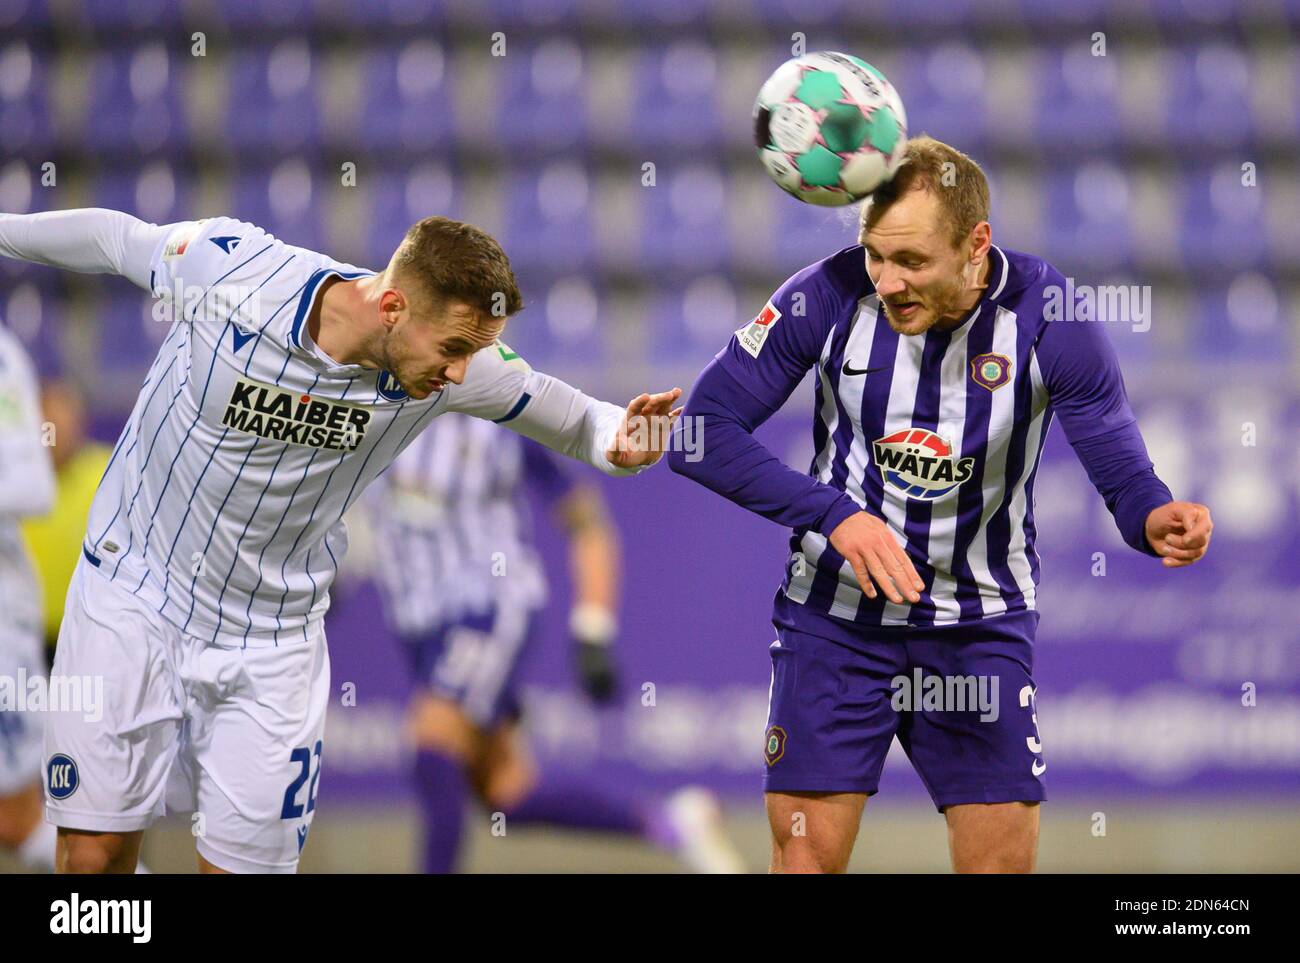 Aue, Germany. 17th Dec, 2020. Football: 2. Bundesliga, FC Erzgebirge Aue - Karlsruher SC, Matchday 12, at Erzgebirgsstadion. Aue's Ben Zolinski (r) against Karlsruhe's Christoph Kobald. Credit: Robert Michael/dpa-Zentralbild/dpa - IMPORTANT NOTE: In accordance with the regulations of the DFL Deutsche Fußball Liga and/or the DFB Deutscher Fußball-Bund, it is prohibited to use or have used photographs taken in the stadium and/or of the match in the form of sequence pictures and/or video-like photo series./dpa/Alamy Live News Stock Photo